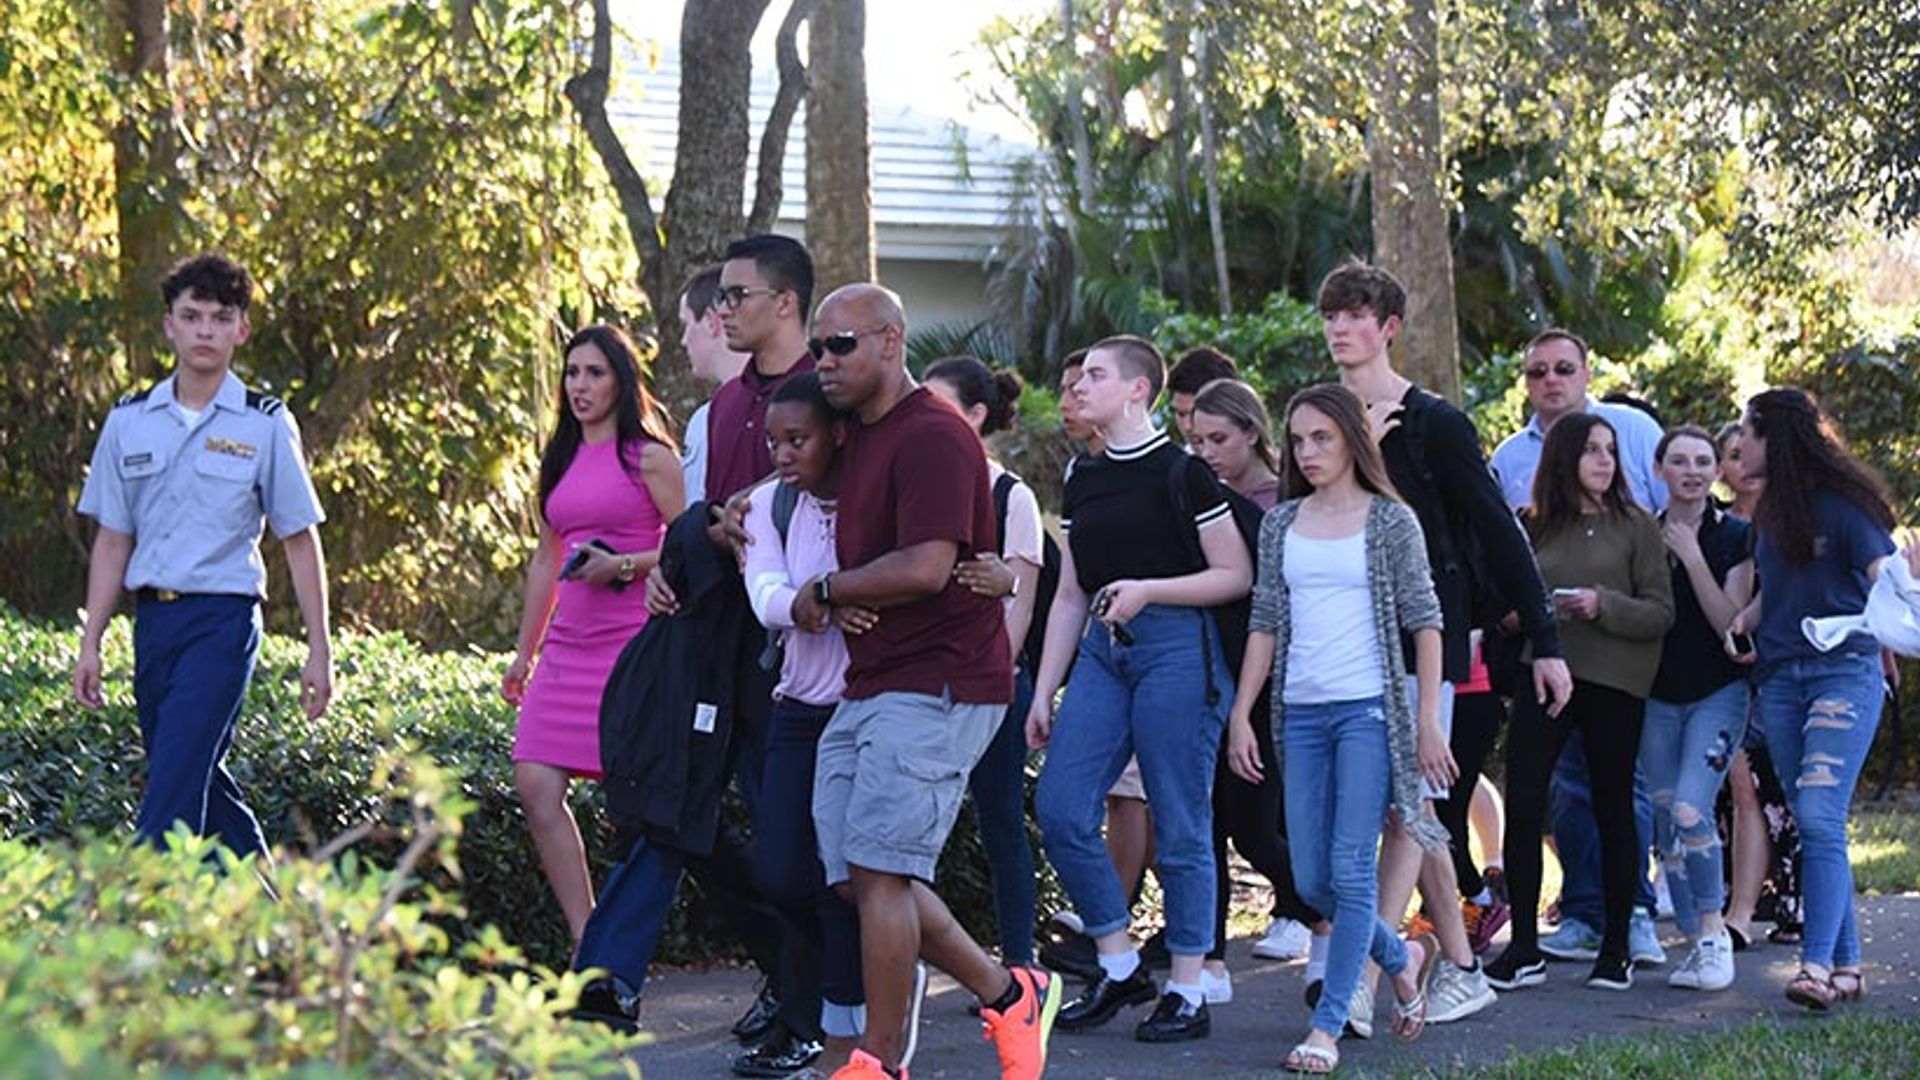 Students leaving Parkland in Florida